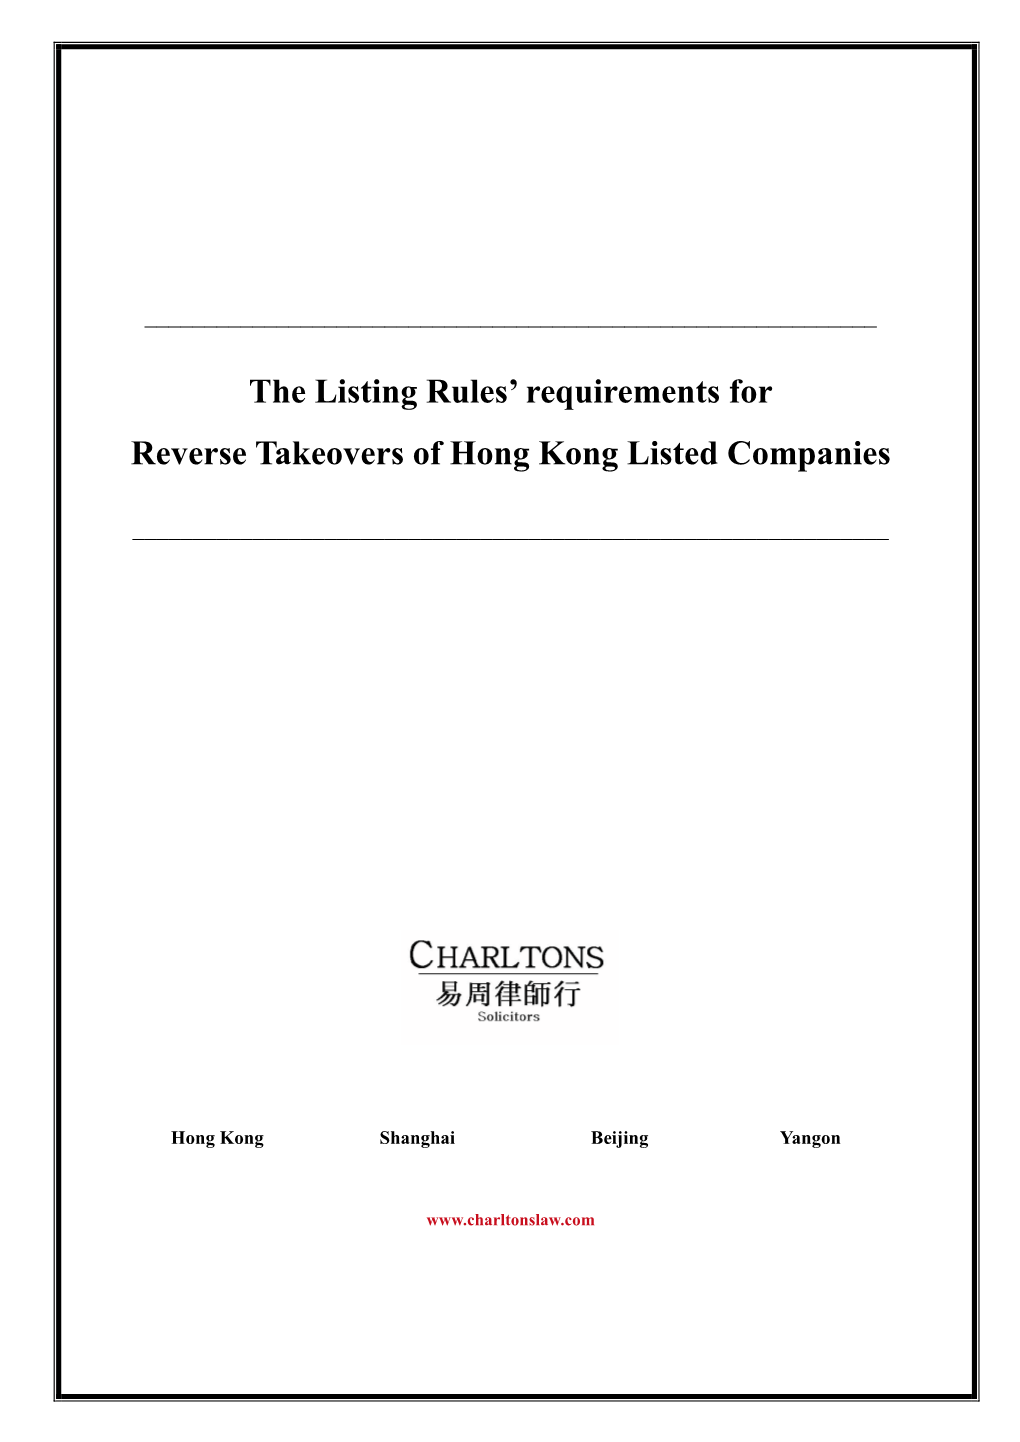 The Listing Rules' Requirements for Reverse Takeovers of Hong Kong Listed Companies